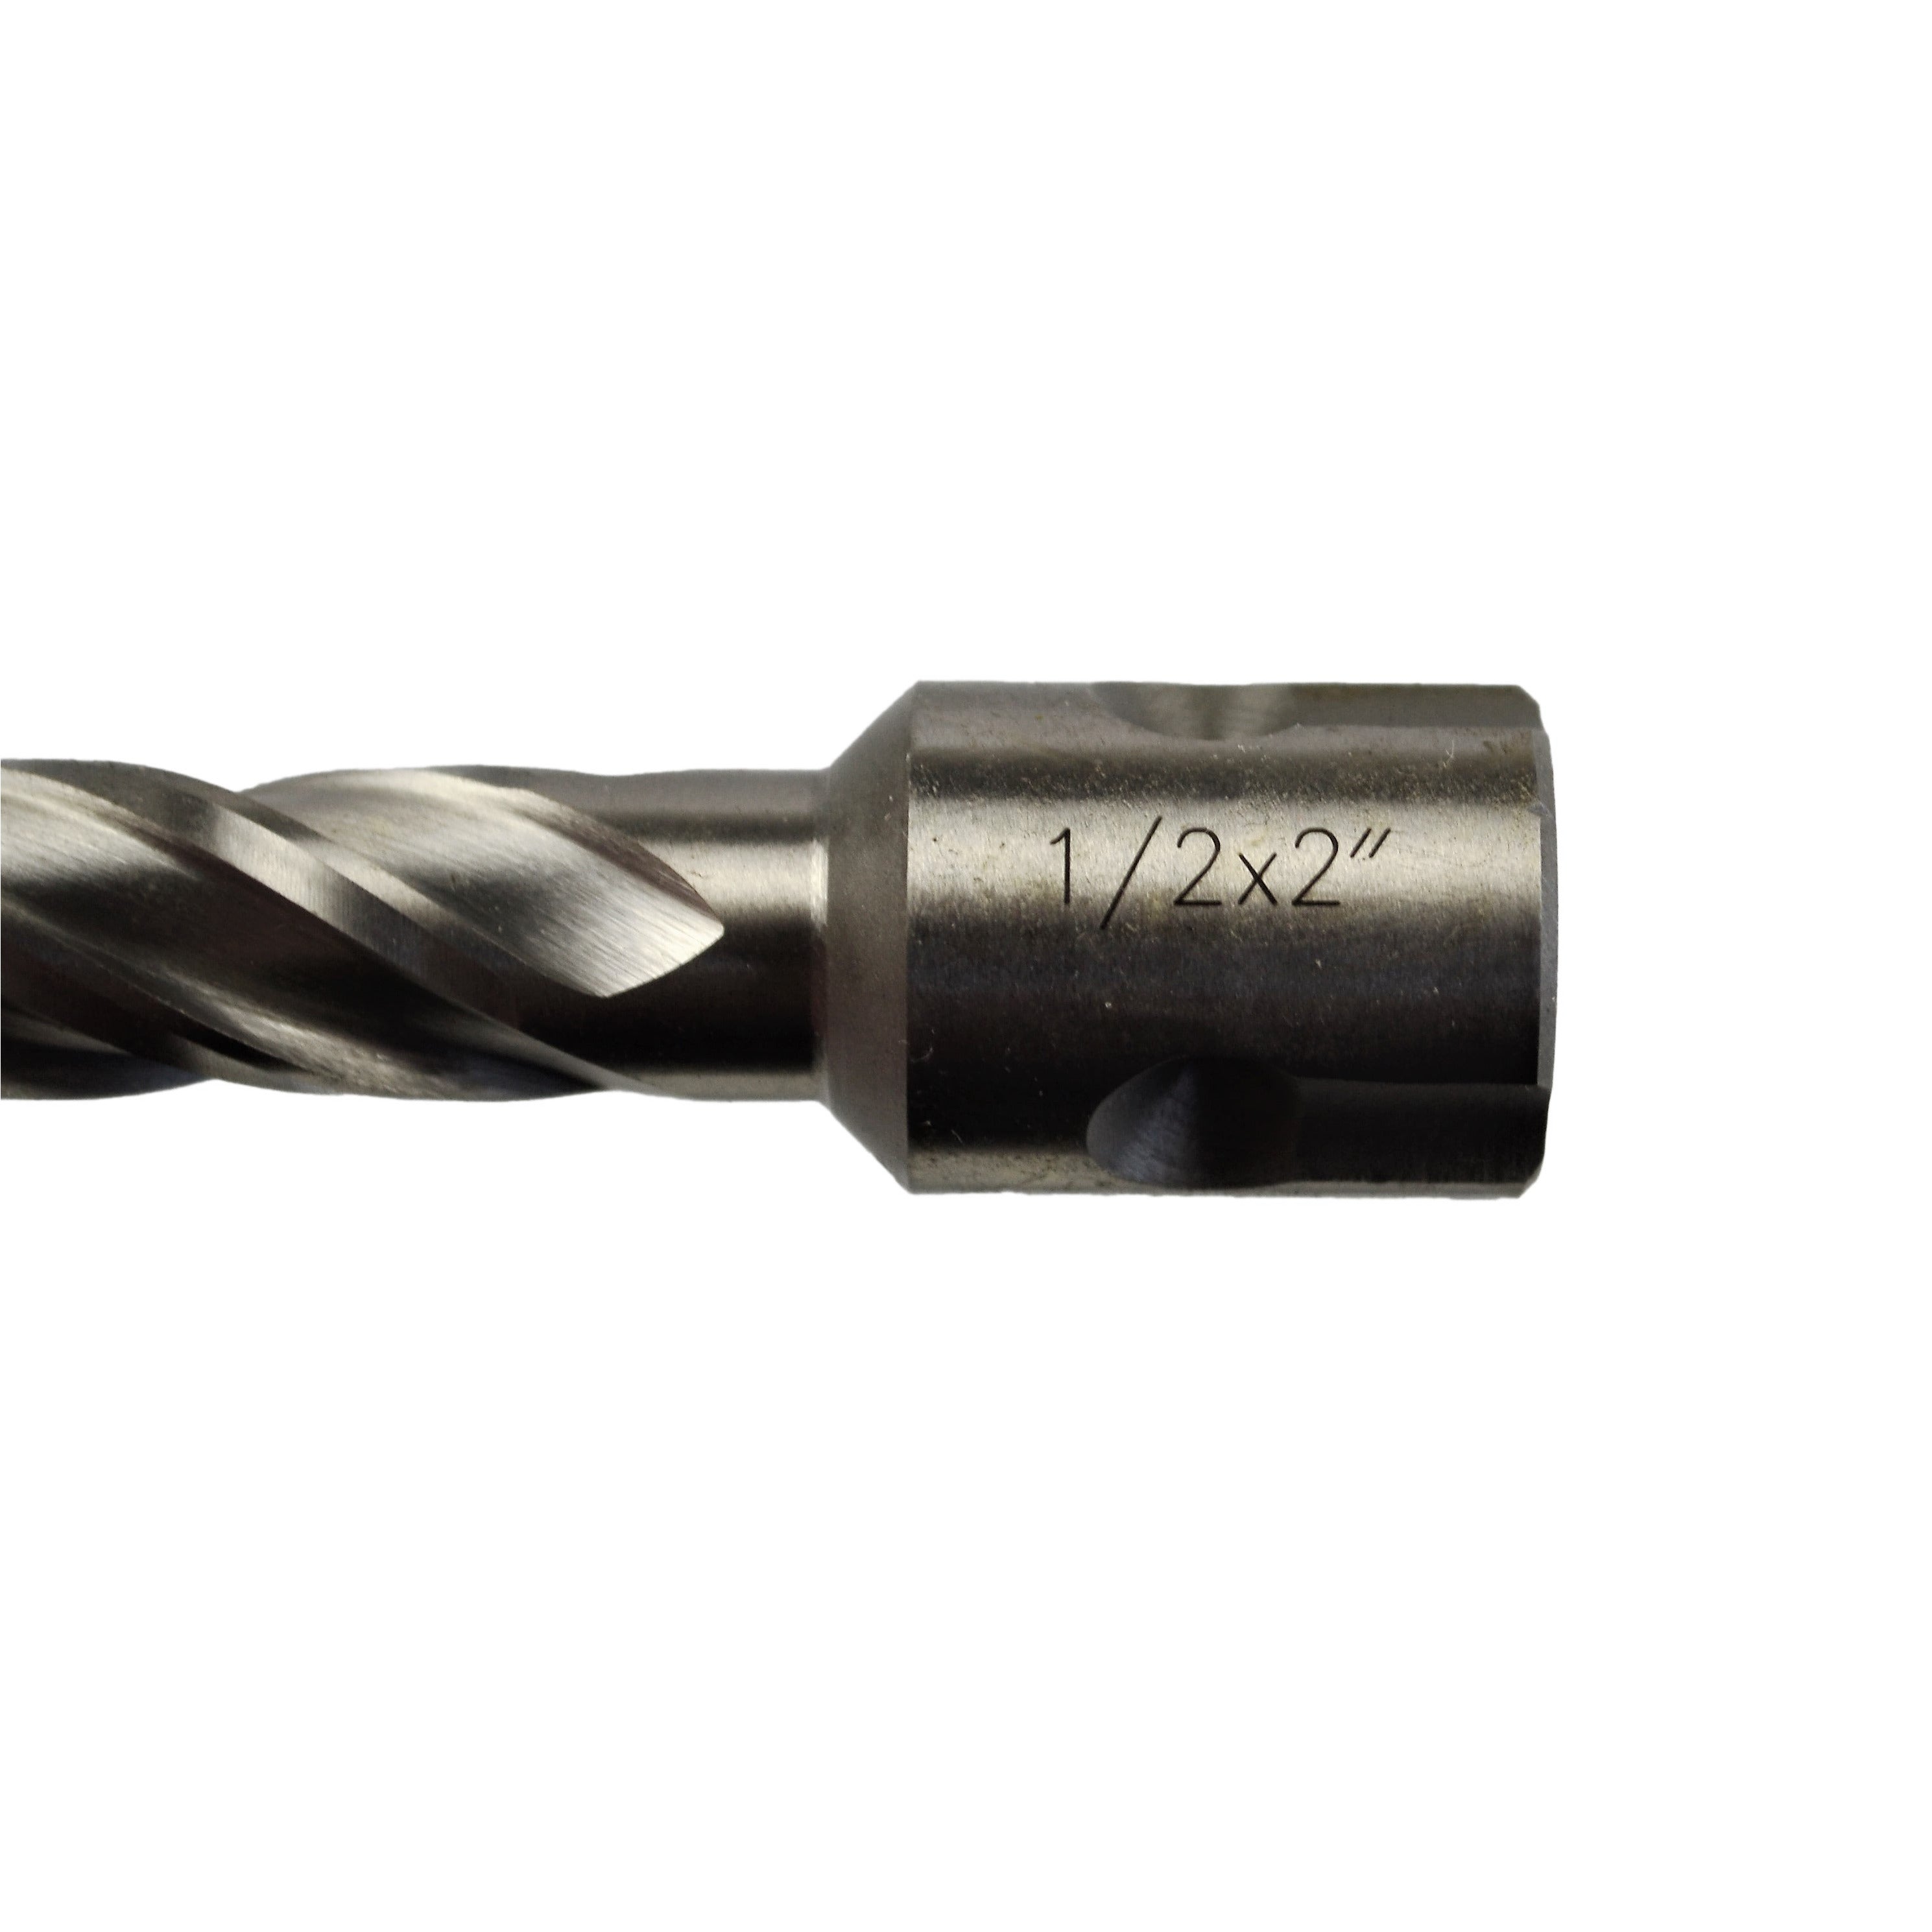  1/2” x  2” -  Annular Cutter - HSS  Made From Quality High Speed Steel.   Drilling Size: 1/2”  Drilling Depth: 2”  Overall Length Including Shank: 87 mm  Overall Length Excluding Shank: 62 mm  Shank Size: Ø19 mm  Pin Size: 6.35 mm  Flutes: 4   Made from high speed tool steel, our 1/2" x 2"  drill bit will quickly and safely cut holes in steel. The size of each cutter is etched on the shaft. This cutter has a 2” cutting depth and ¾” Weldon shank. Harlingen annular cutters are the solution to your high toler